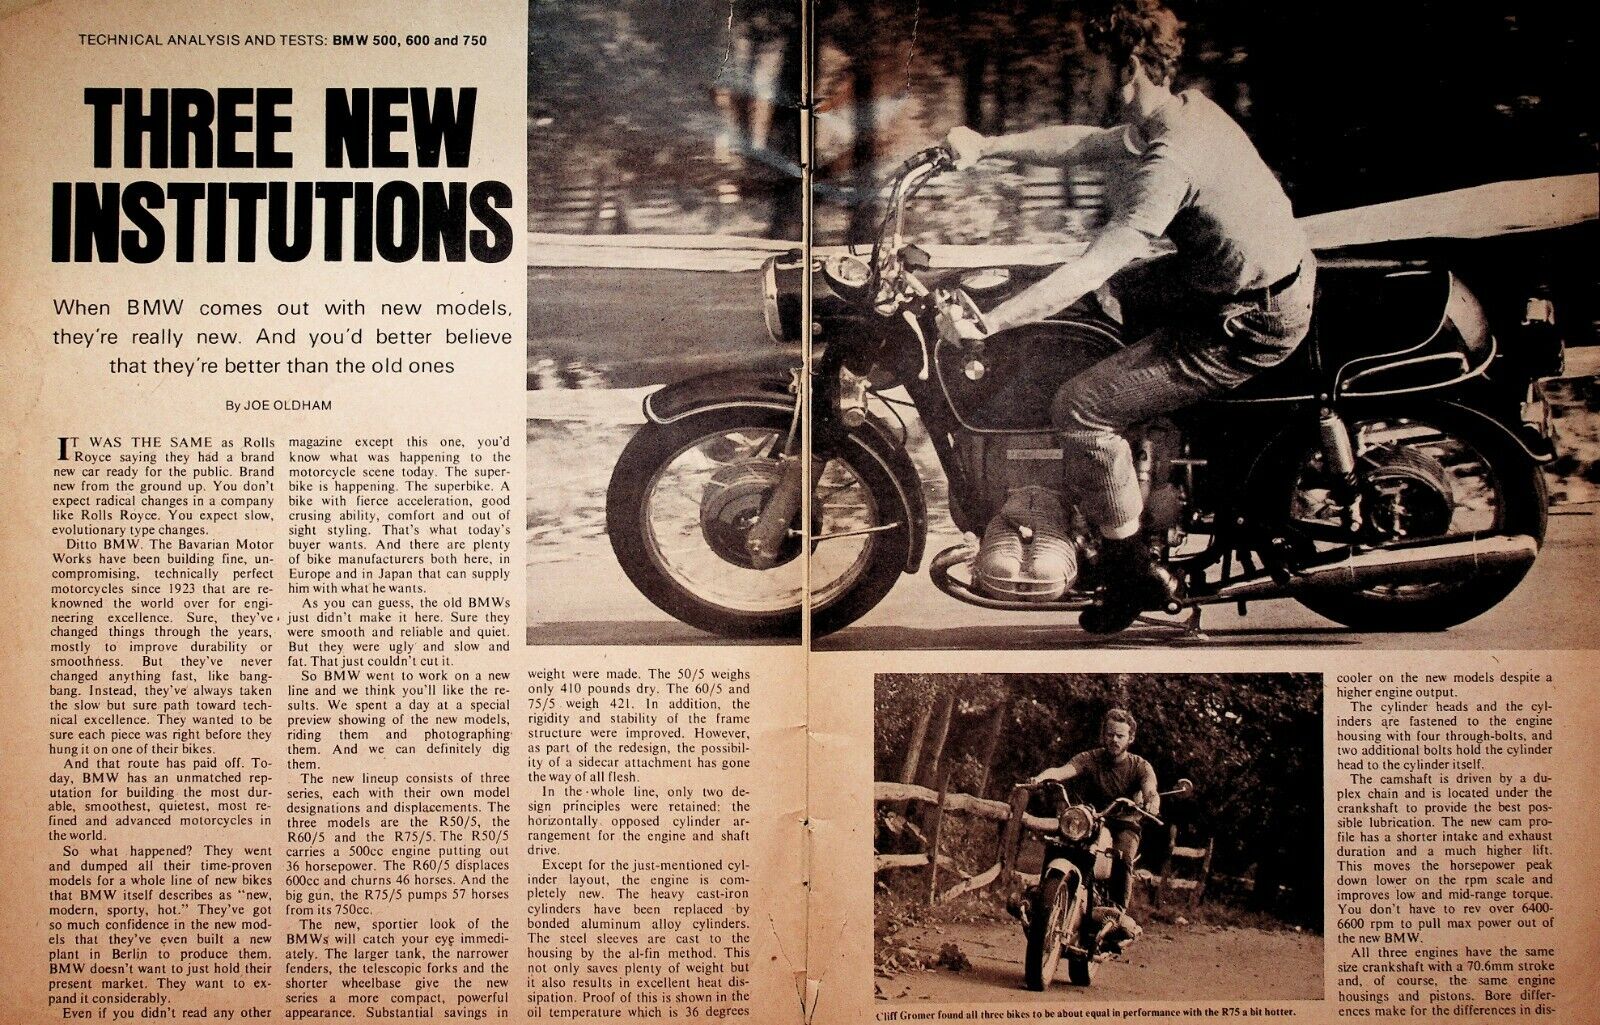 1970 BMW 500, 600 & 750 Technical Analysis & Tests - 9-Page Motorcycle Article